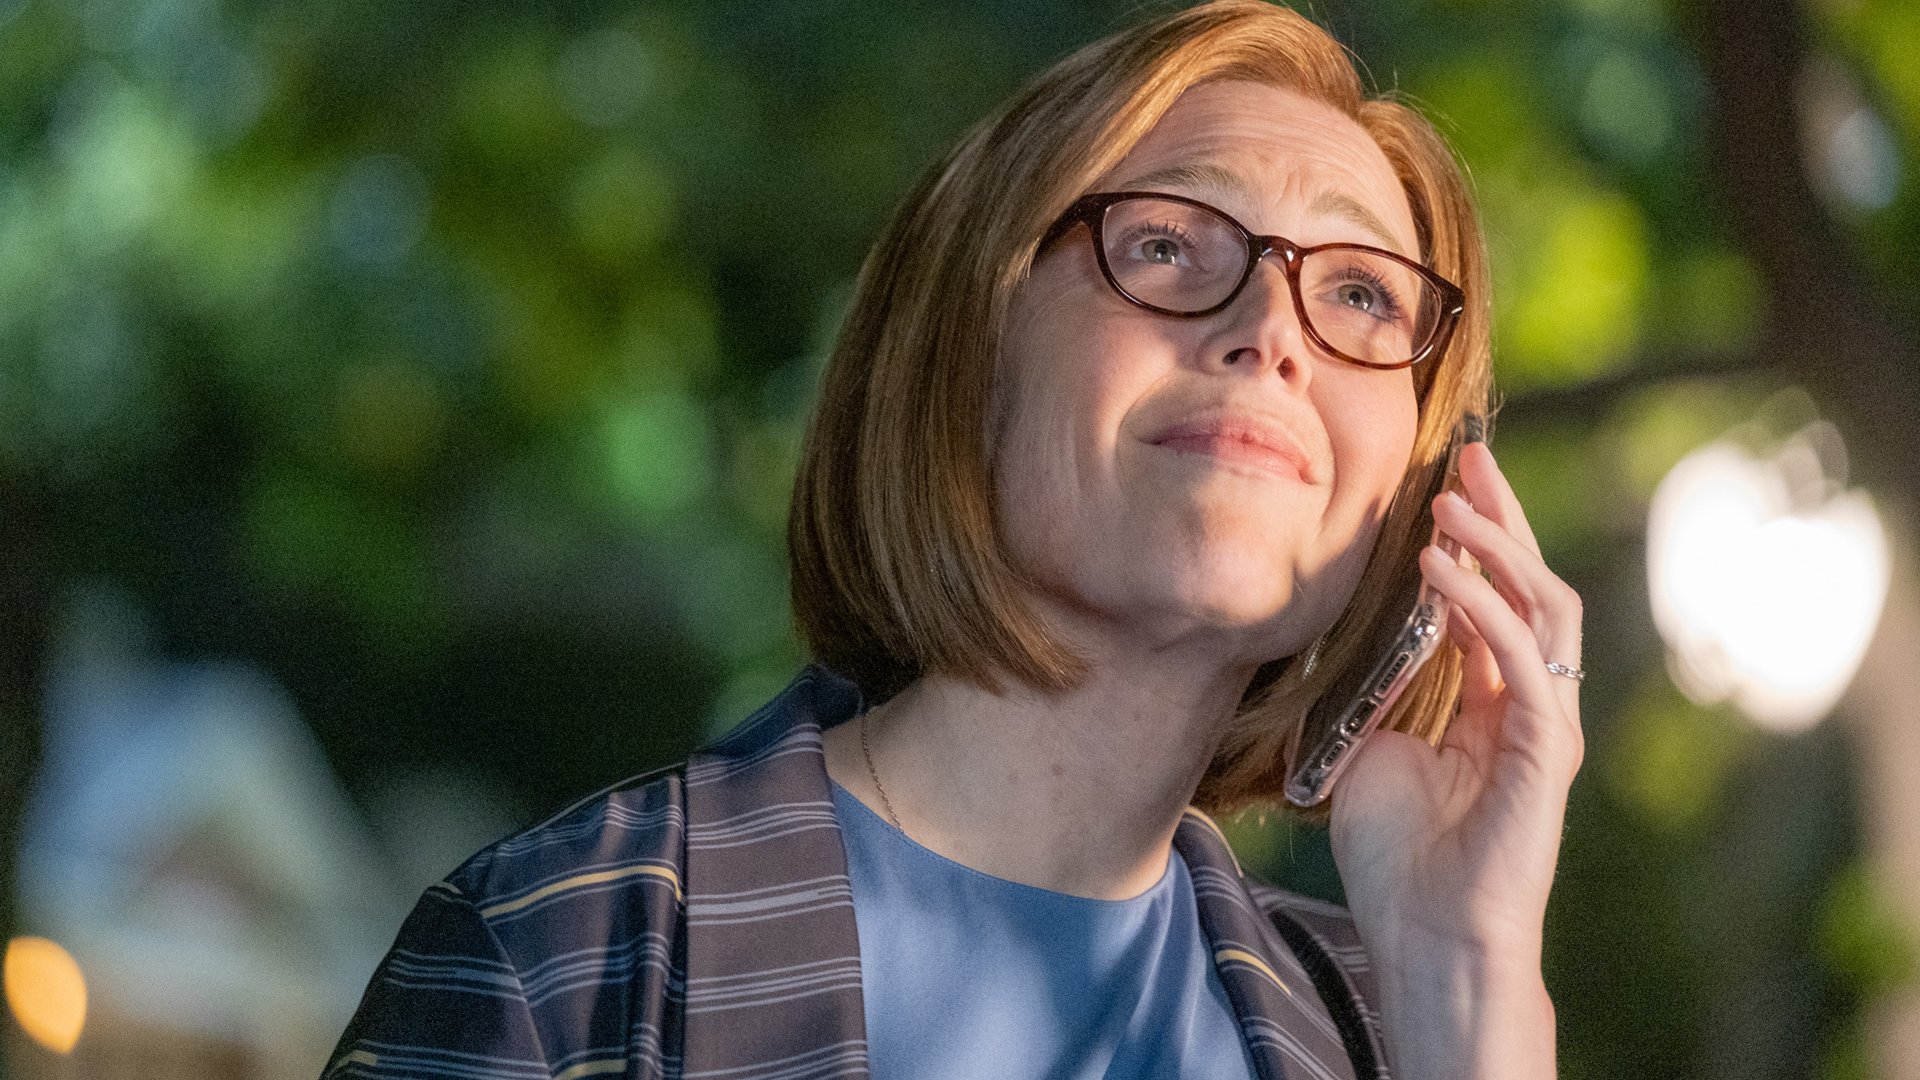 Mandy Moore as Rebecca Pearson looking up while on the phone in ‘This Is Us’ Season 5 Episode 15